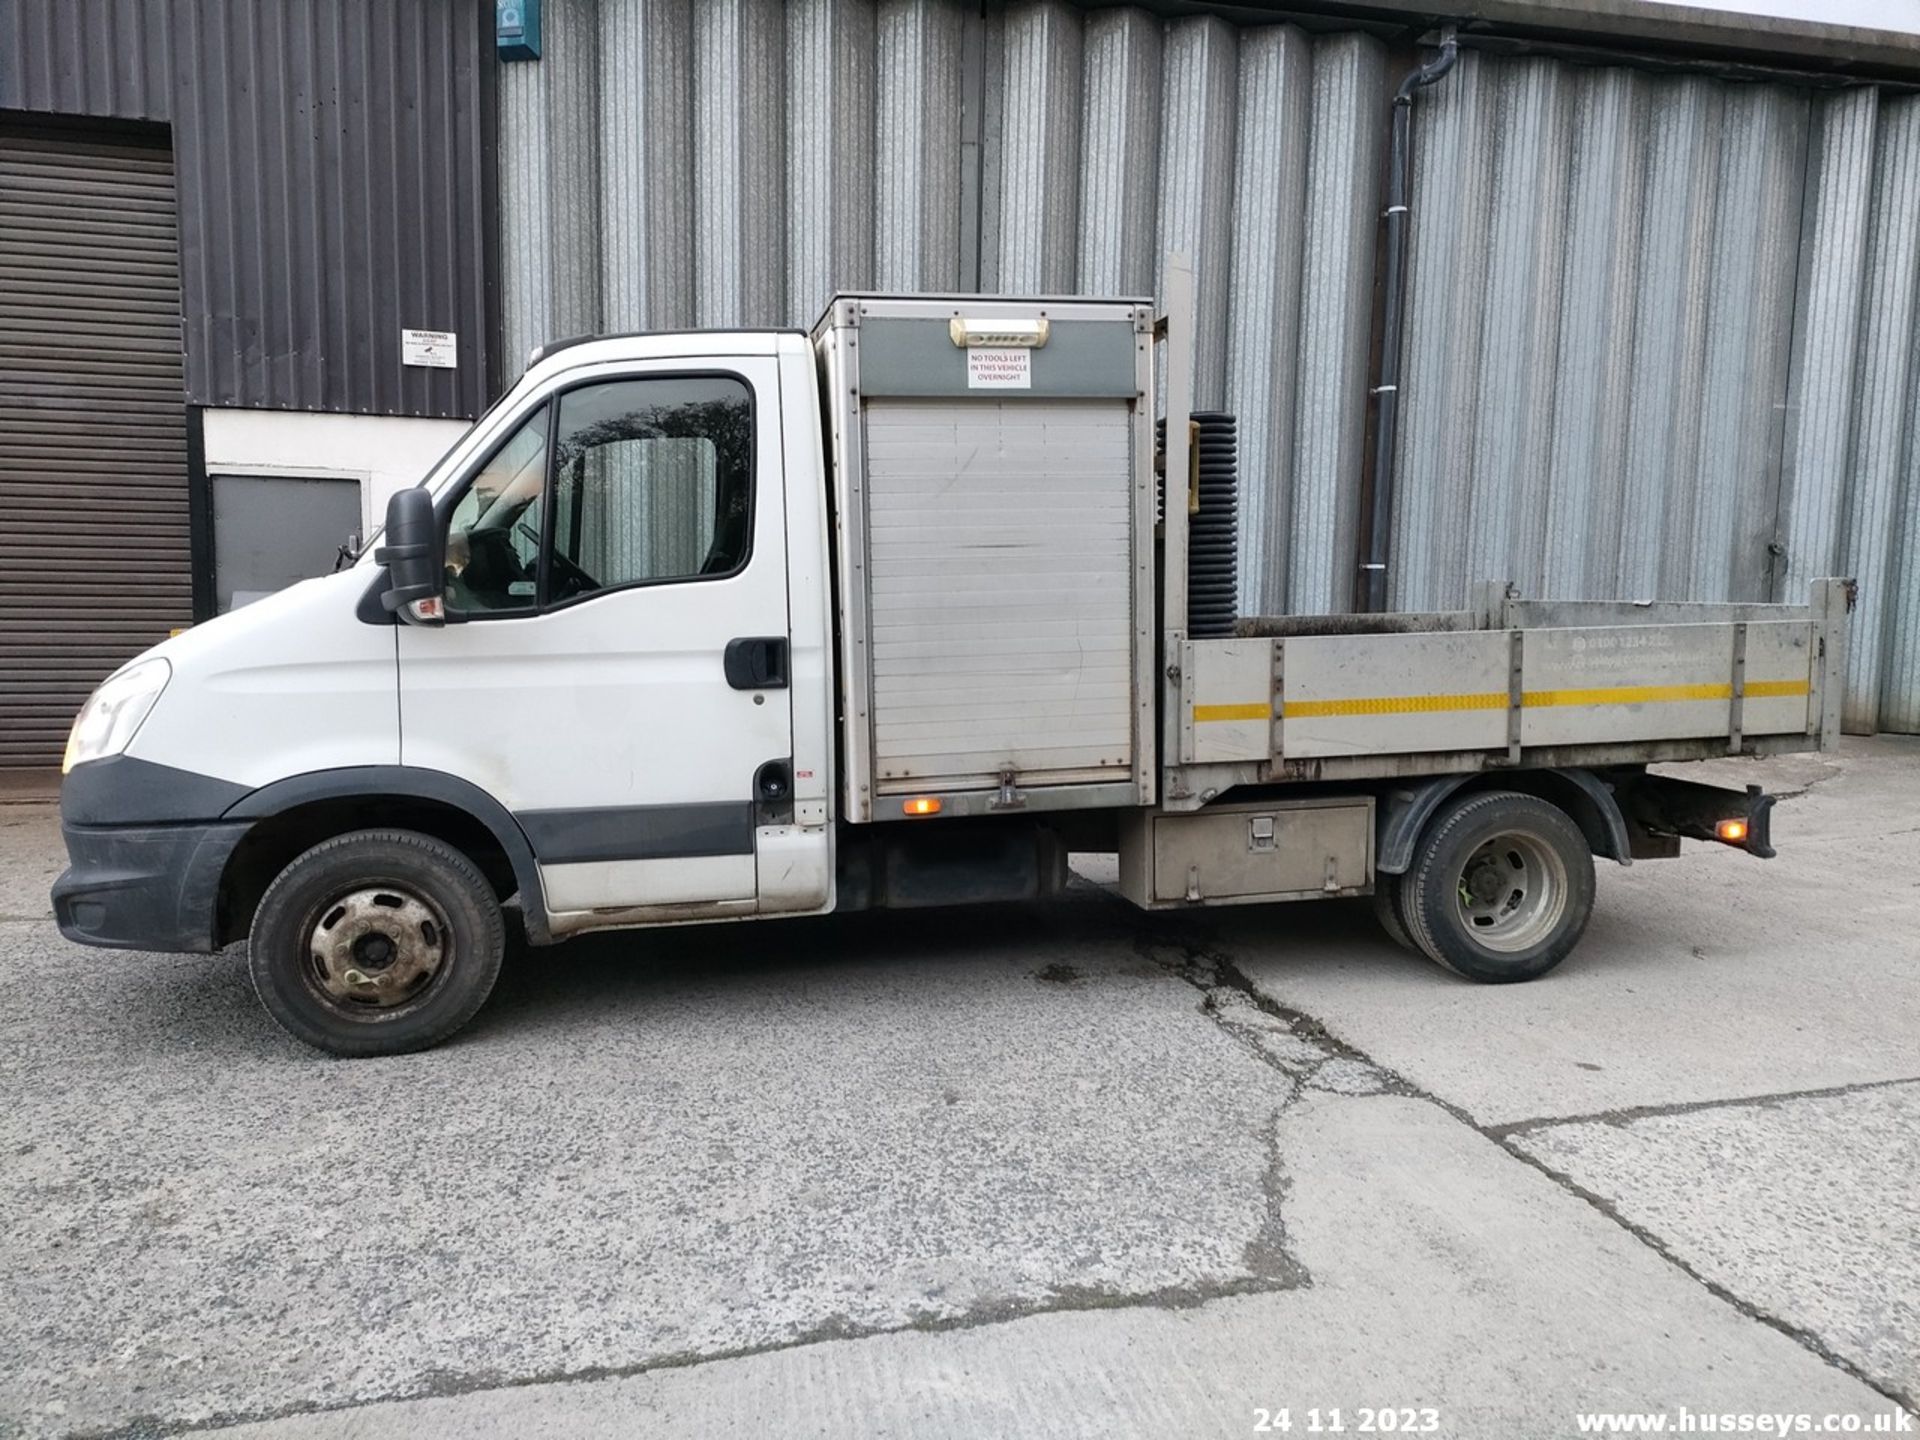 14/14 IVECO DAILY 45C15 - 2998cc 2dr Tipper (White) - Image 13 of 36